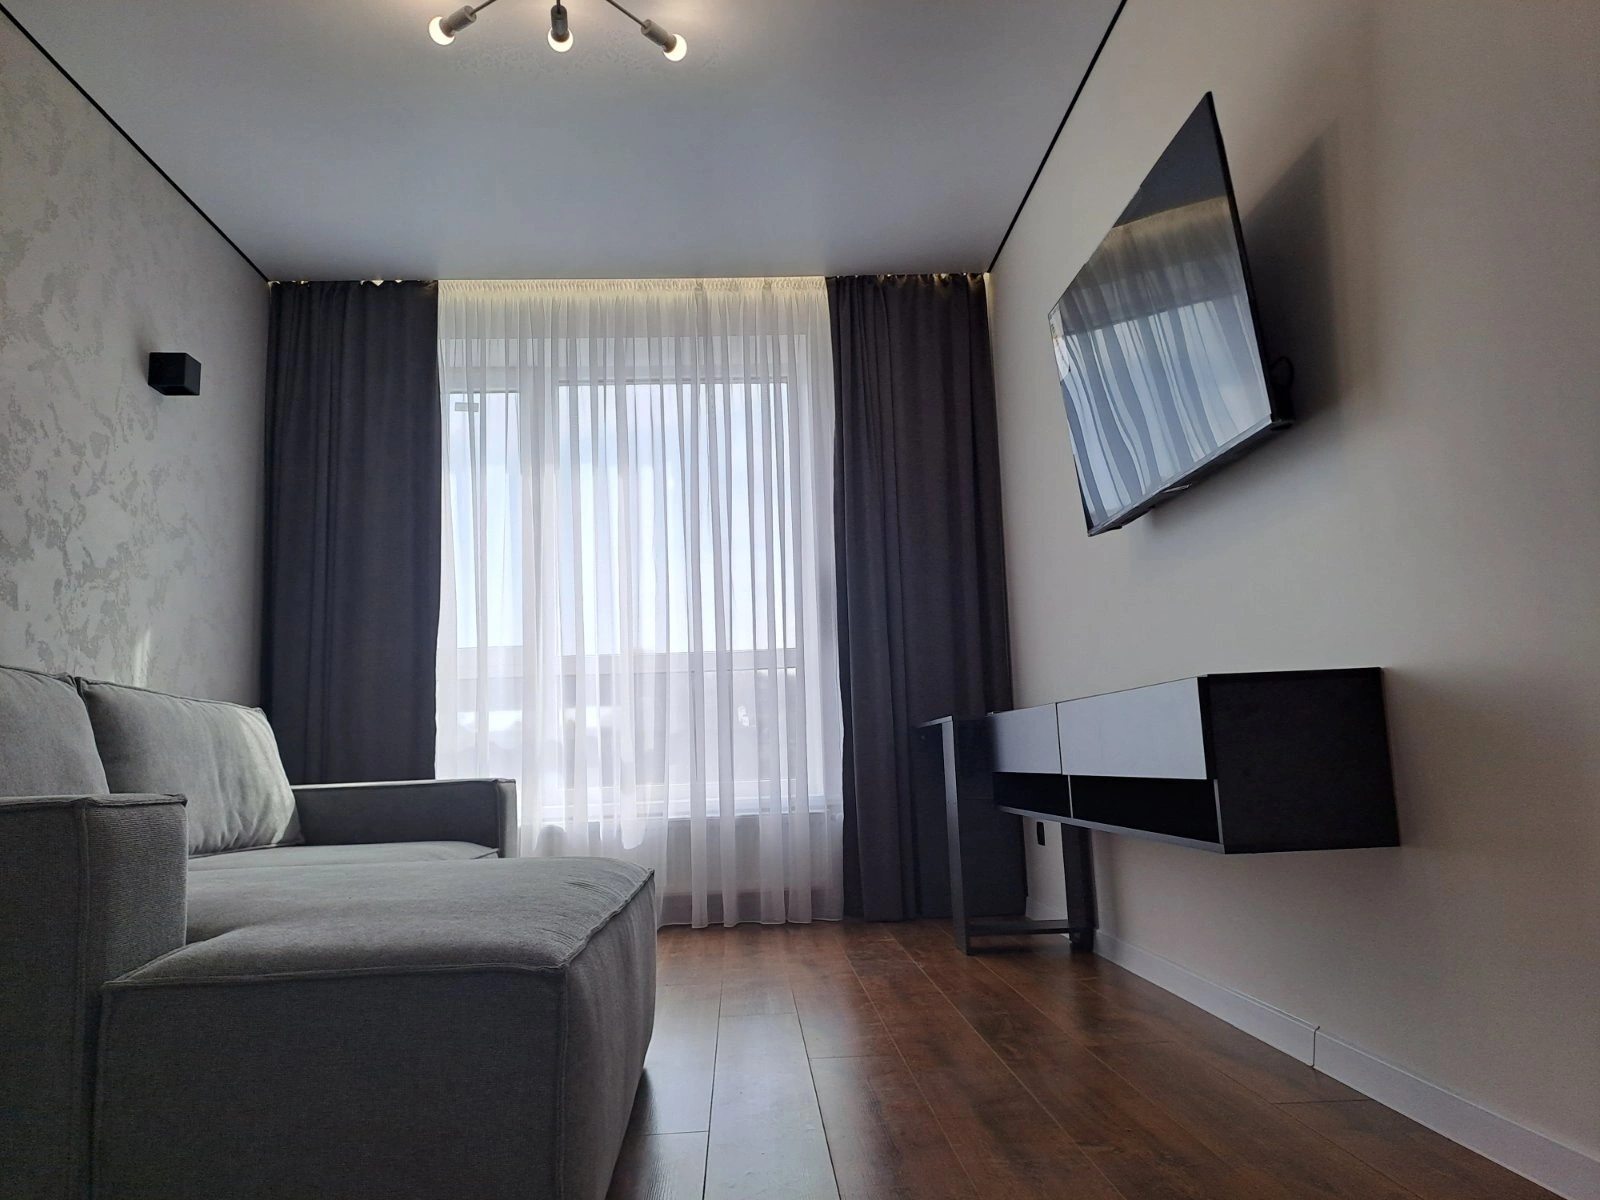 Apartments for sale. 1 room, 42 m², 4th floor/5 floors. Staryy park, Ternopil. 